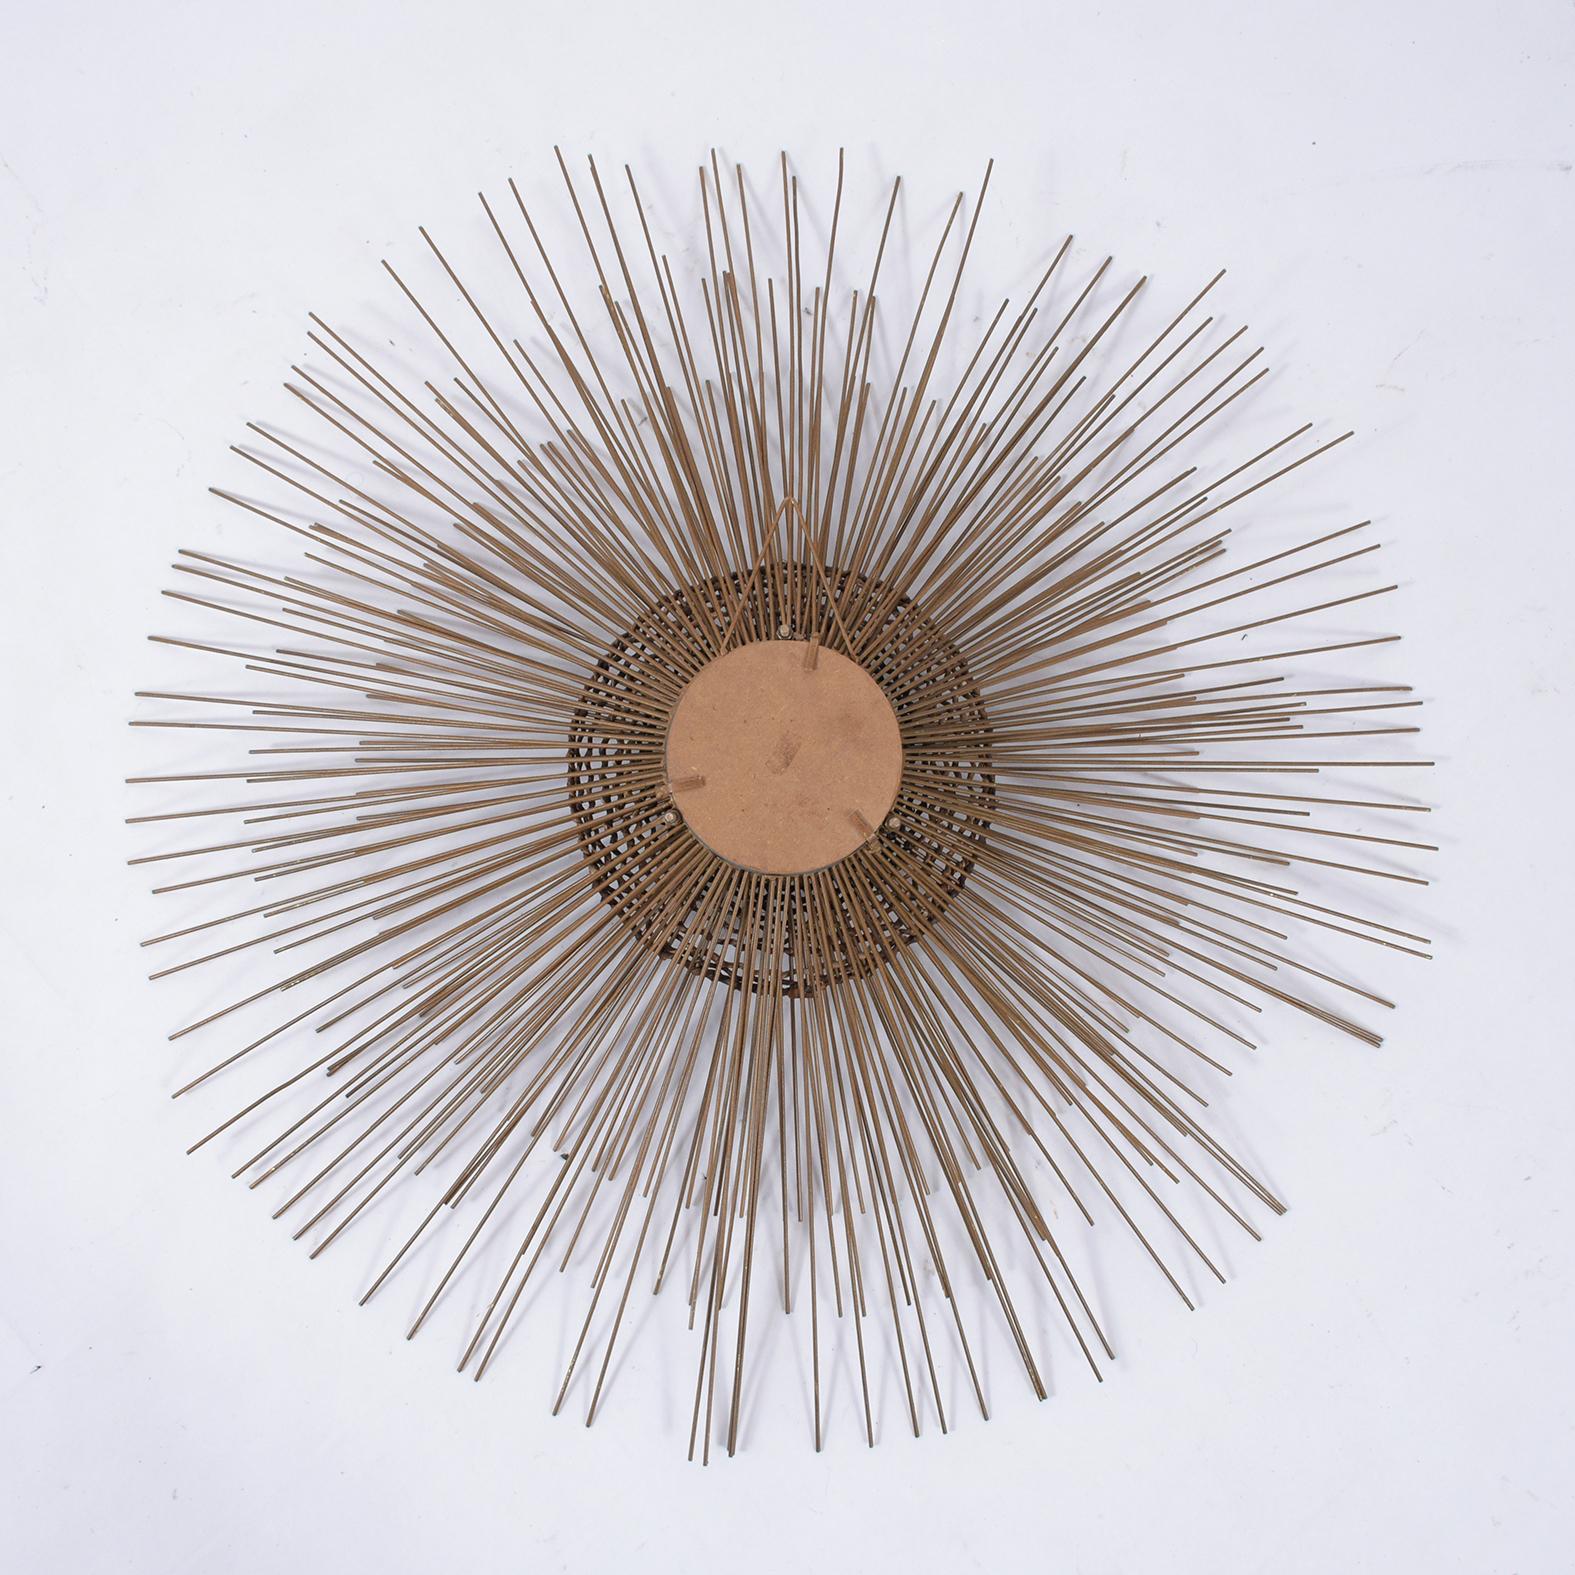 Mid-20th Century Mid-Century Modern Brass Sunburst Mirror with Woven Caning, 5.5' Diameter For Sale